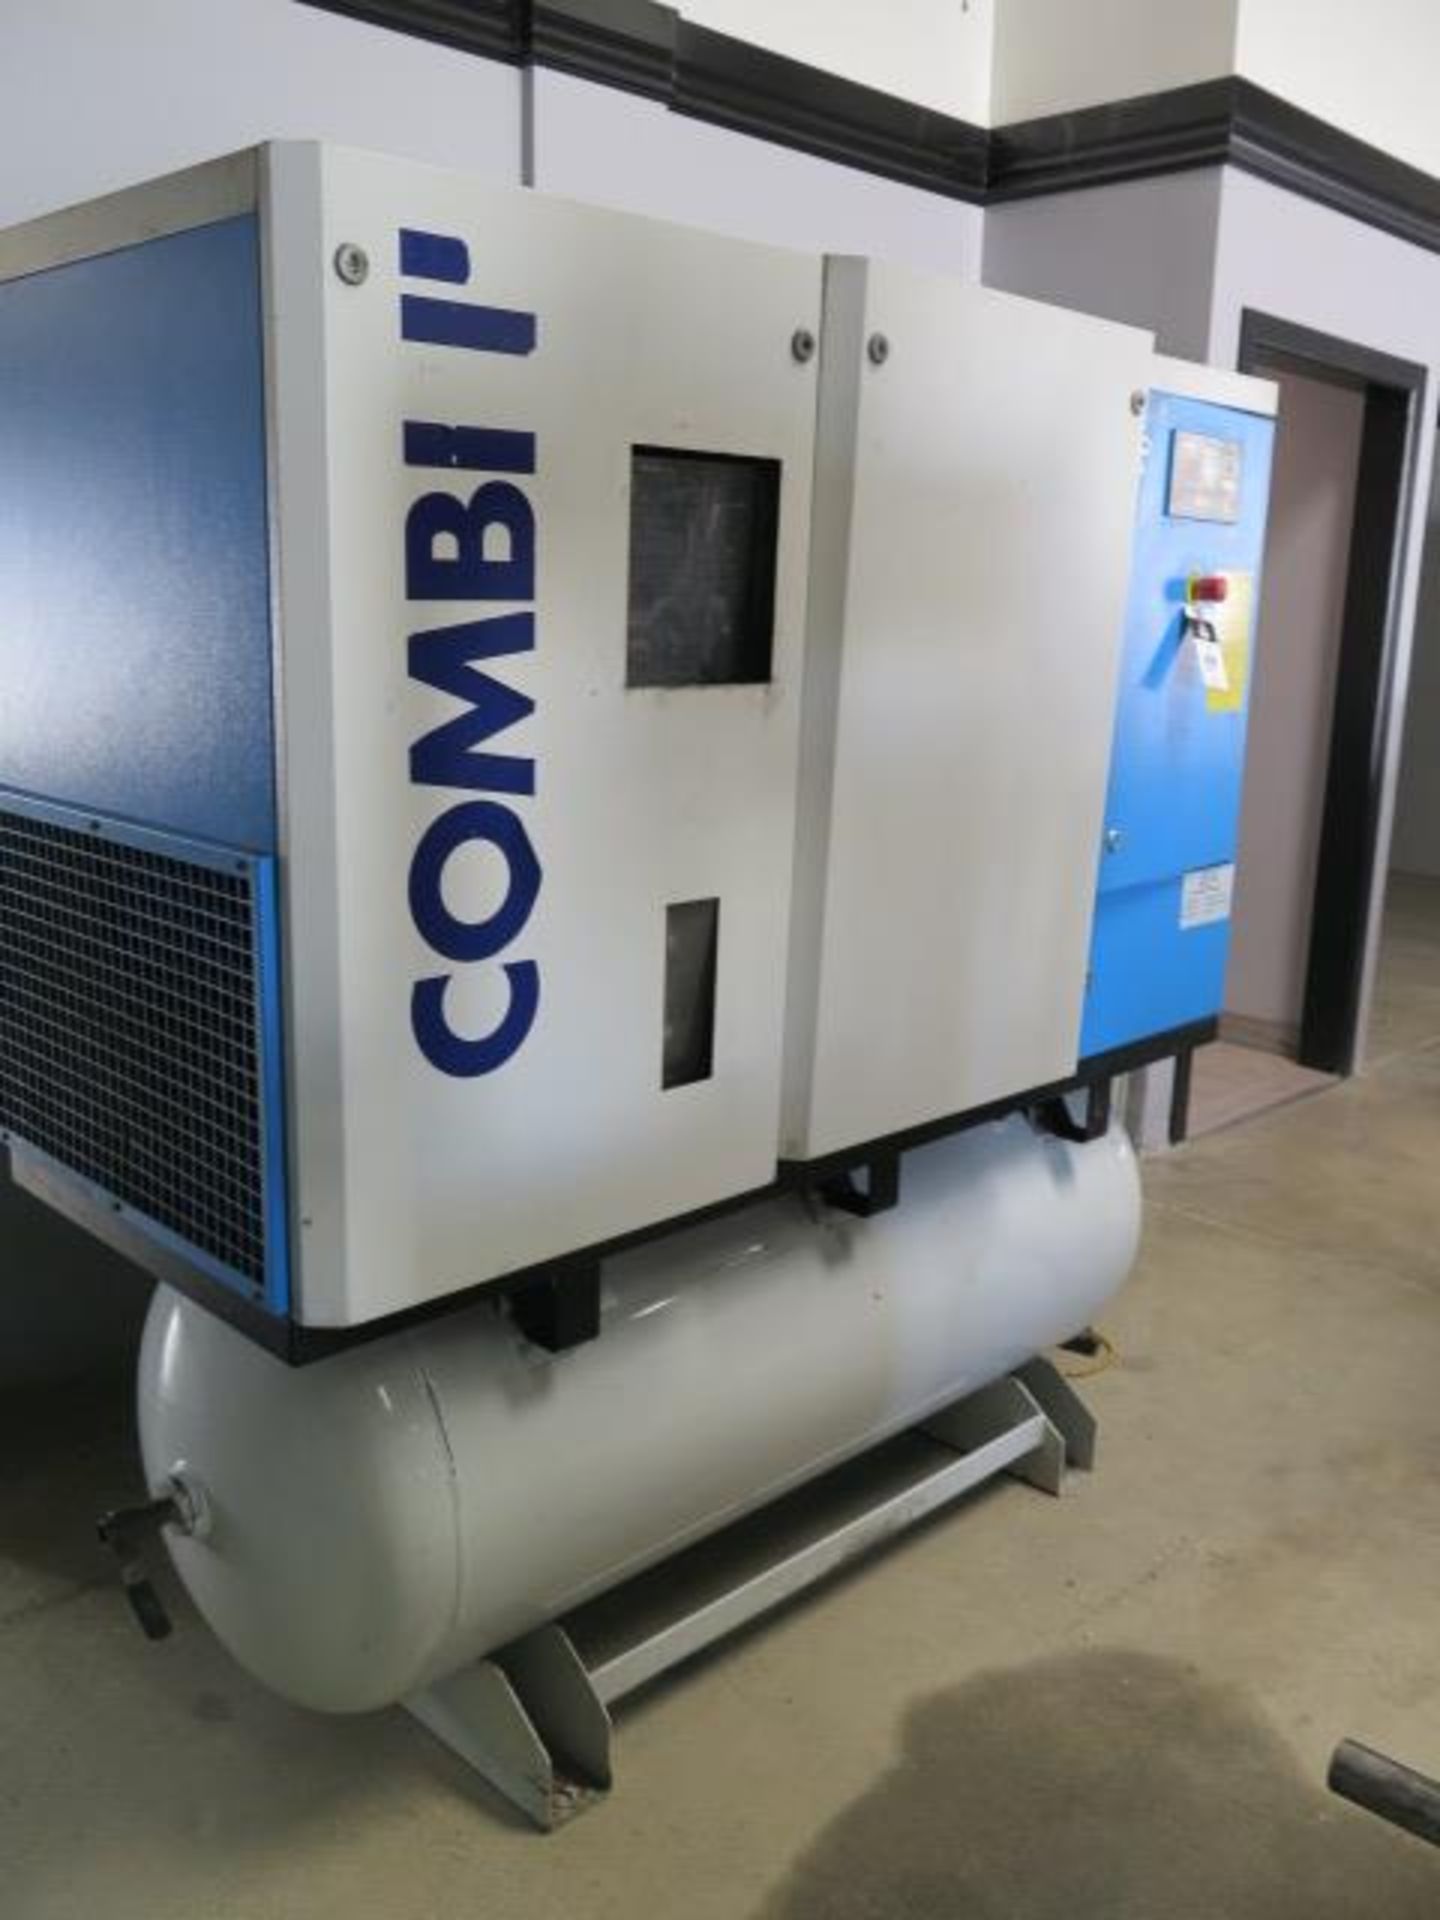 Alup COMBI II mdl. C25255 25Hp Rotary Air Comp s/n HOP250016 w/ Alup Digital Controls, SOLD AS IS - Bild 2 aus 10